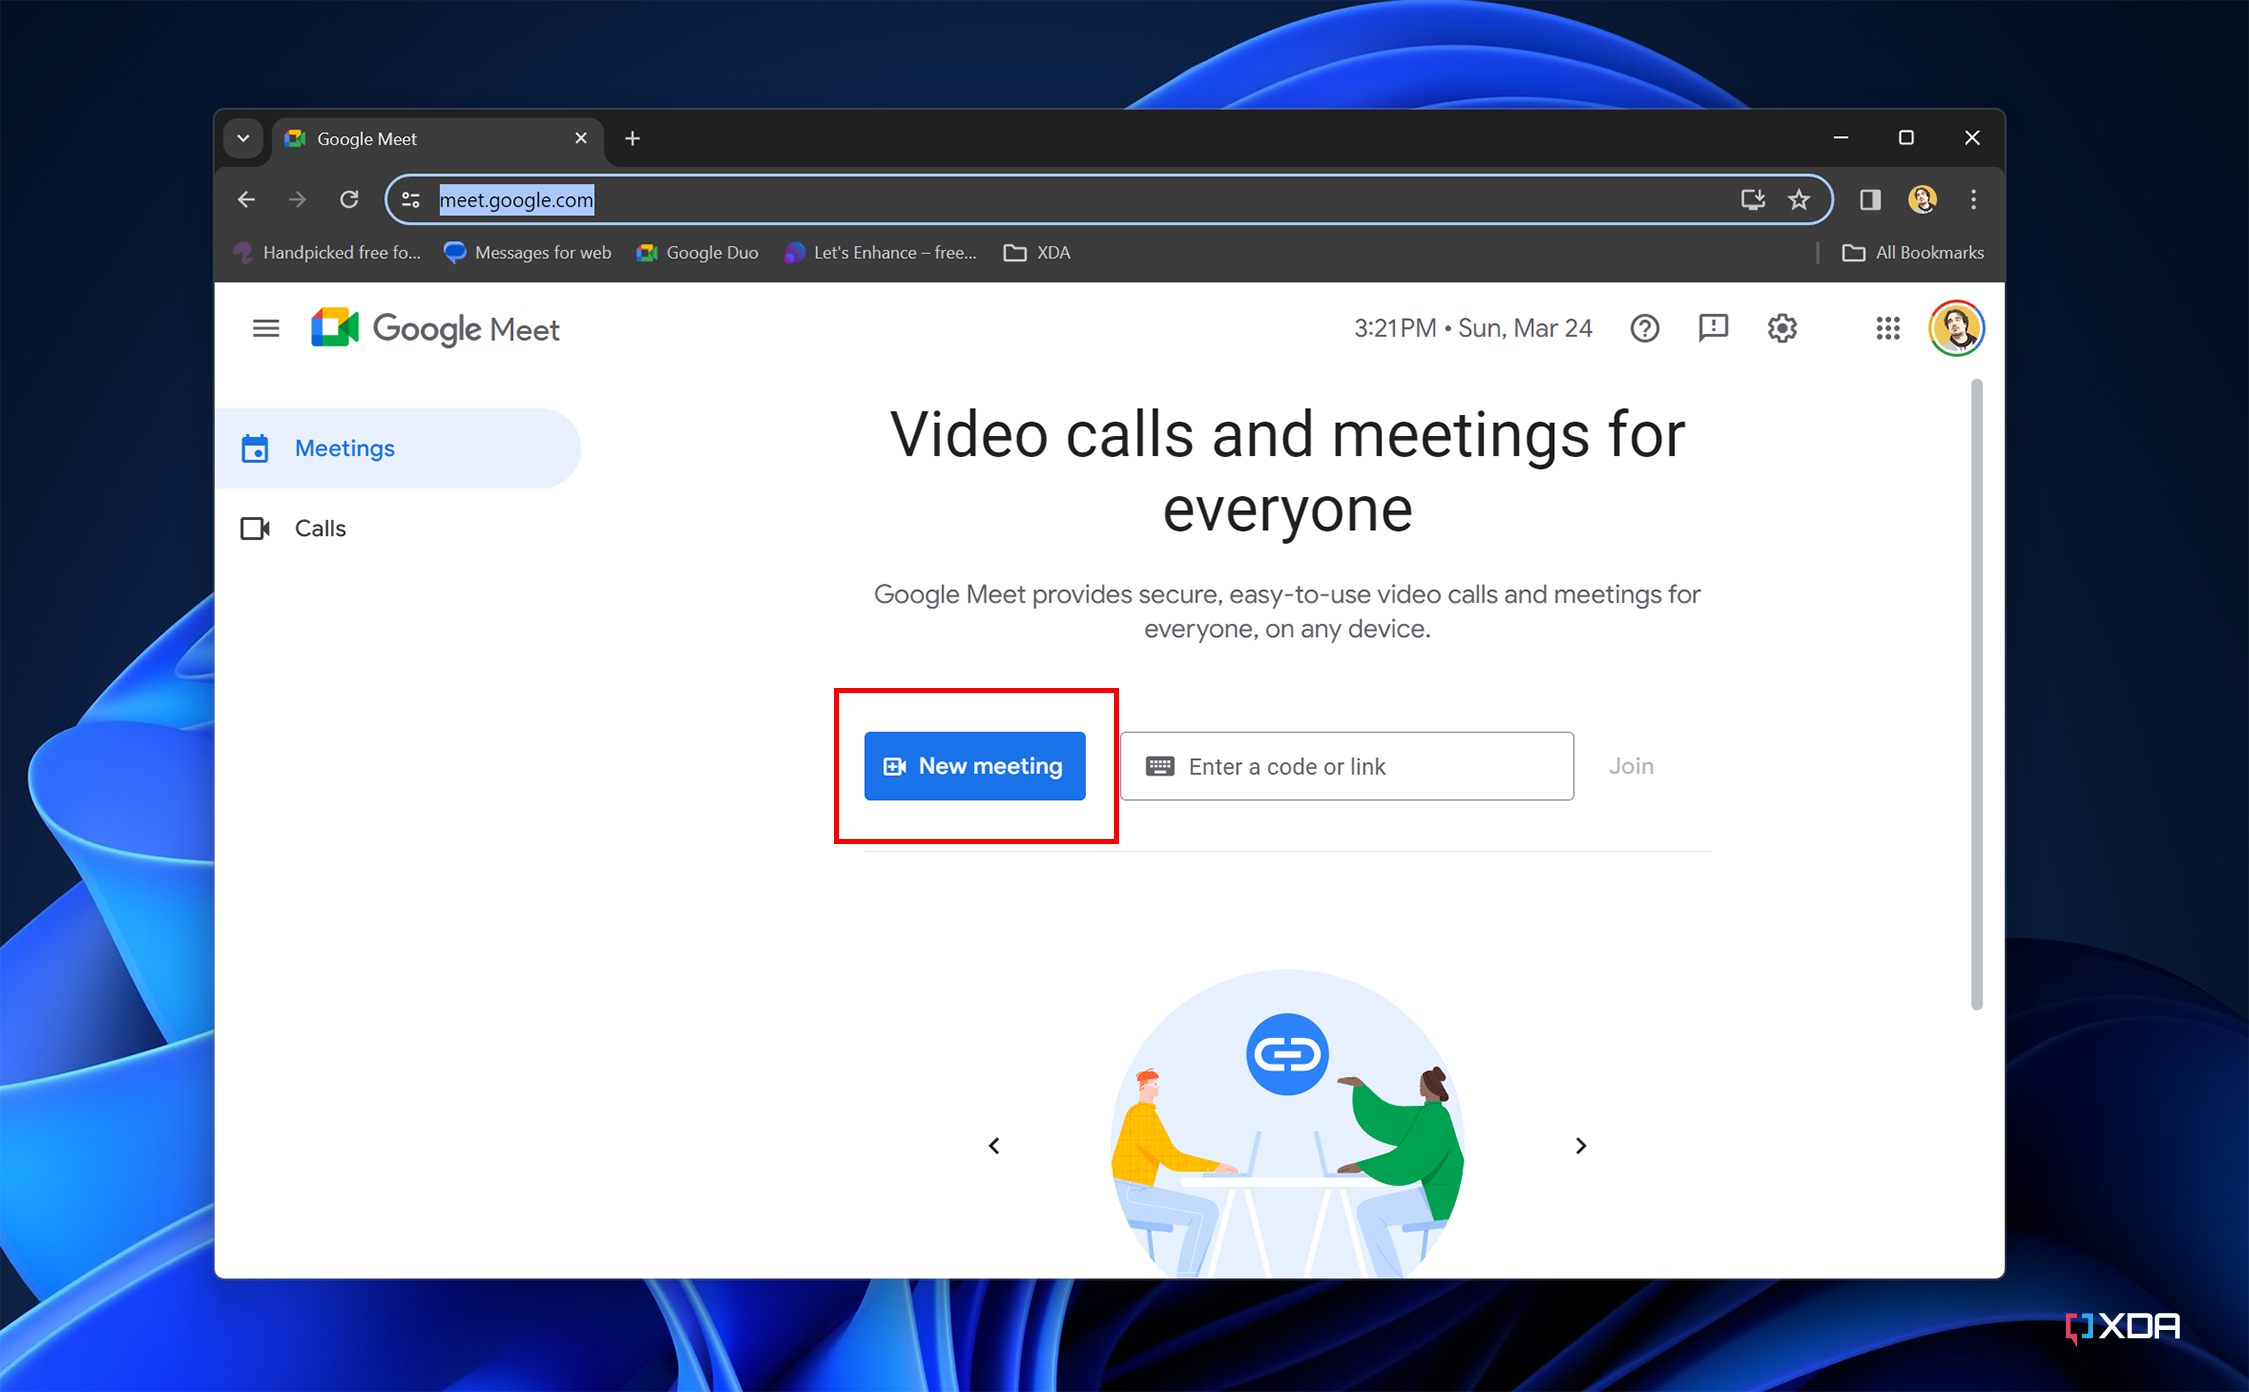 Using your video call service of choice, create a new call or meeting instance.